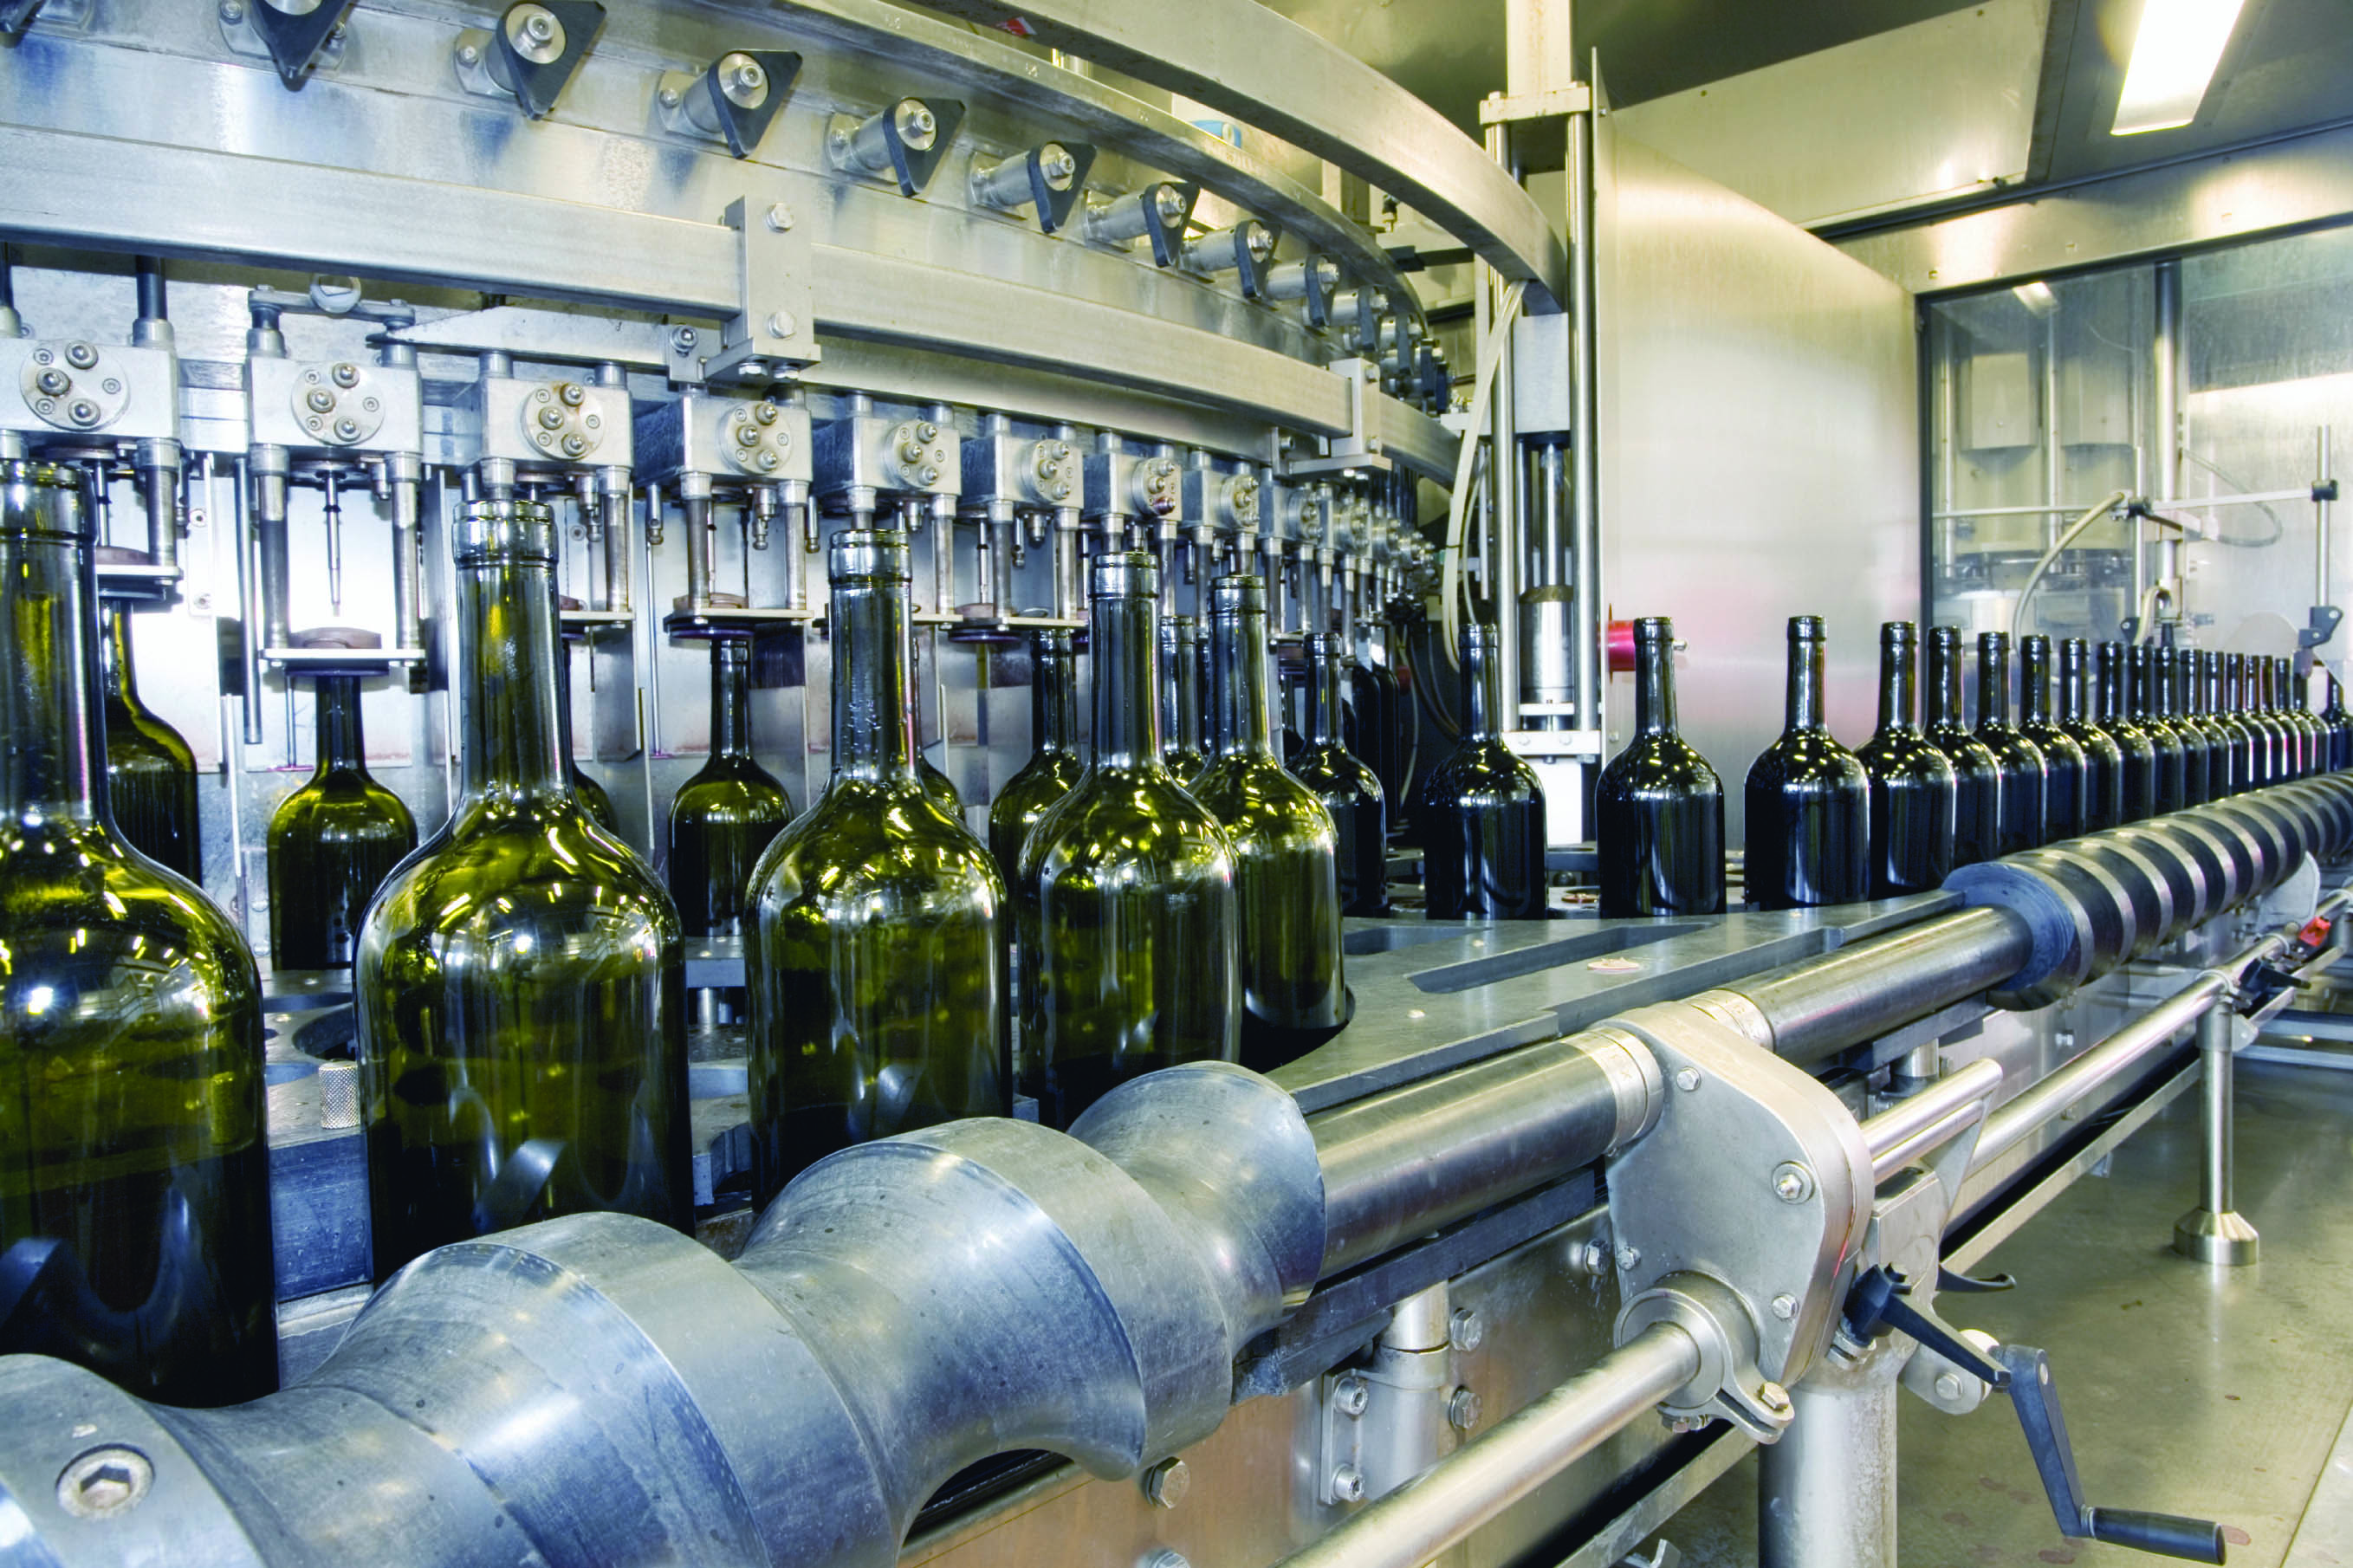 Cartridge Filters Lower Cost of Wine Production